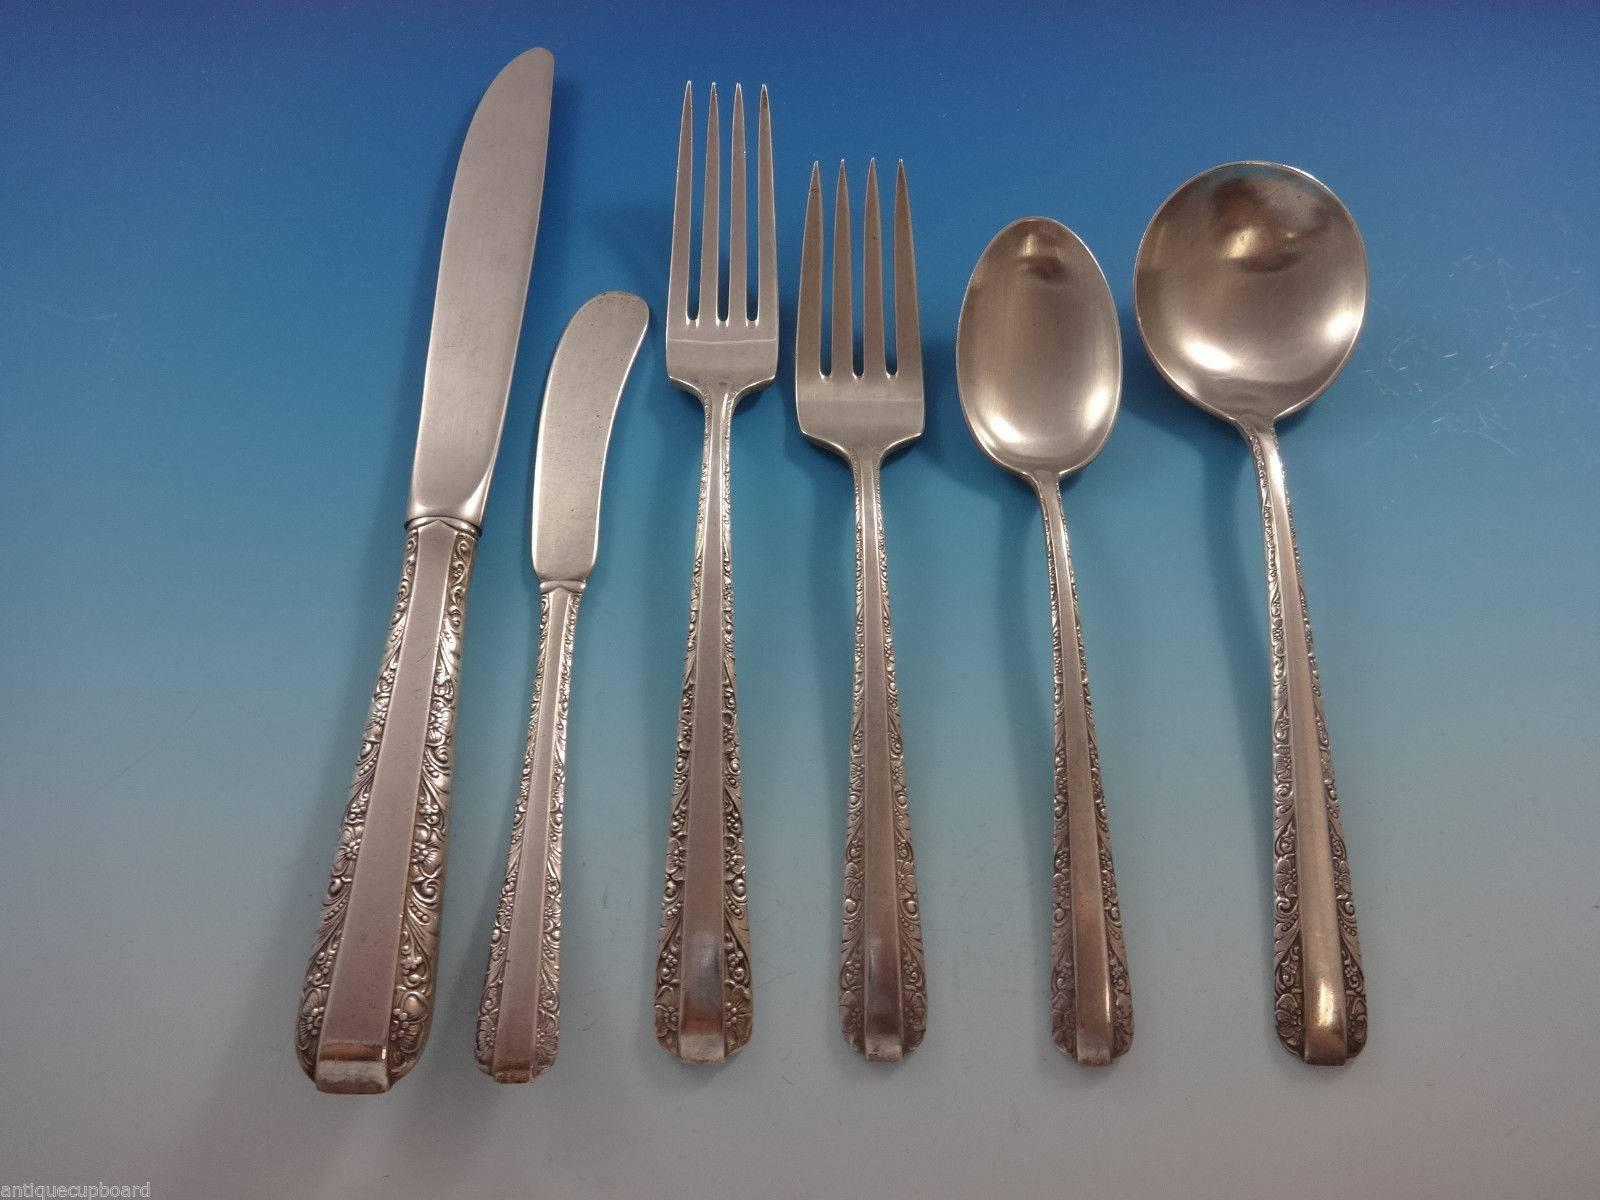 A striking effect of plain sterling contrasted with rich ornamentation. No other pattern has the allure of a raised ribbon of silver laid over a rich decorative background. Candlelight stands alone among exquisite sterling flatware